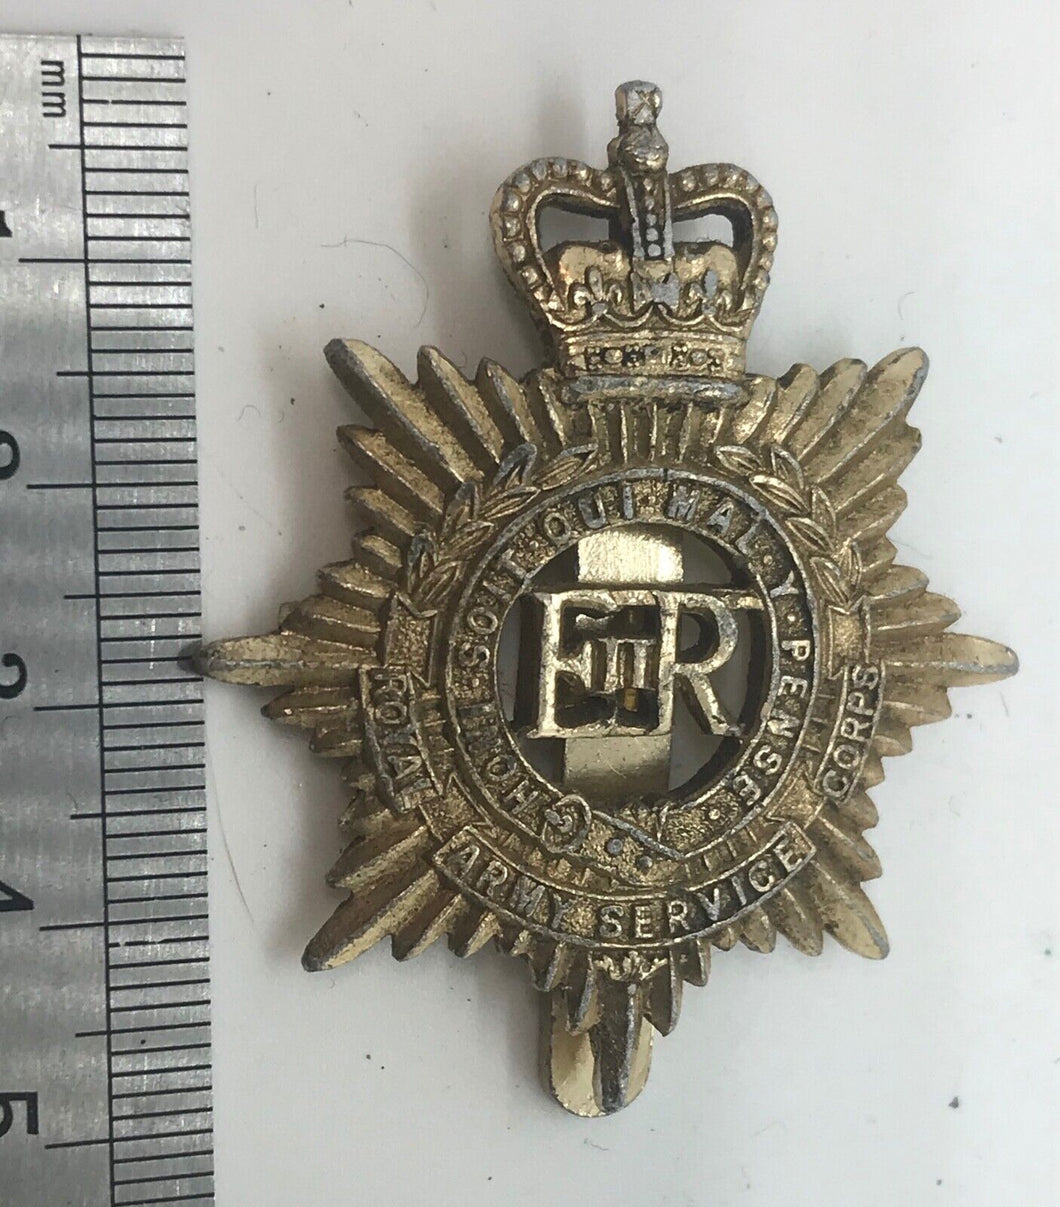 Officers British Army ARMY SERVICE CORPS staybrite cap badge  ---  B10